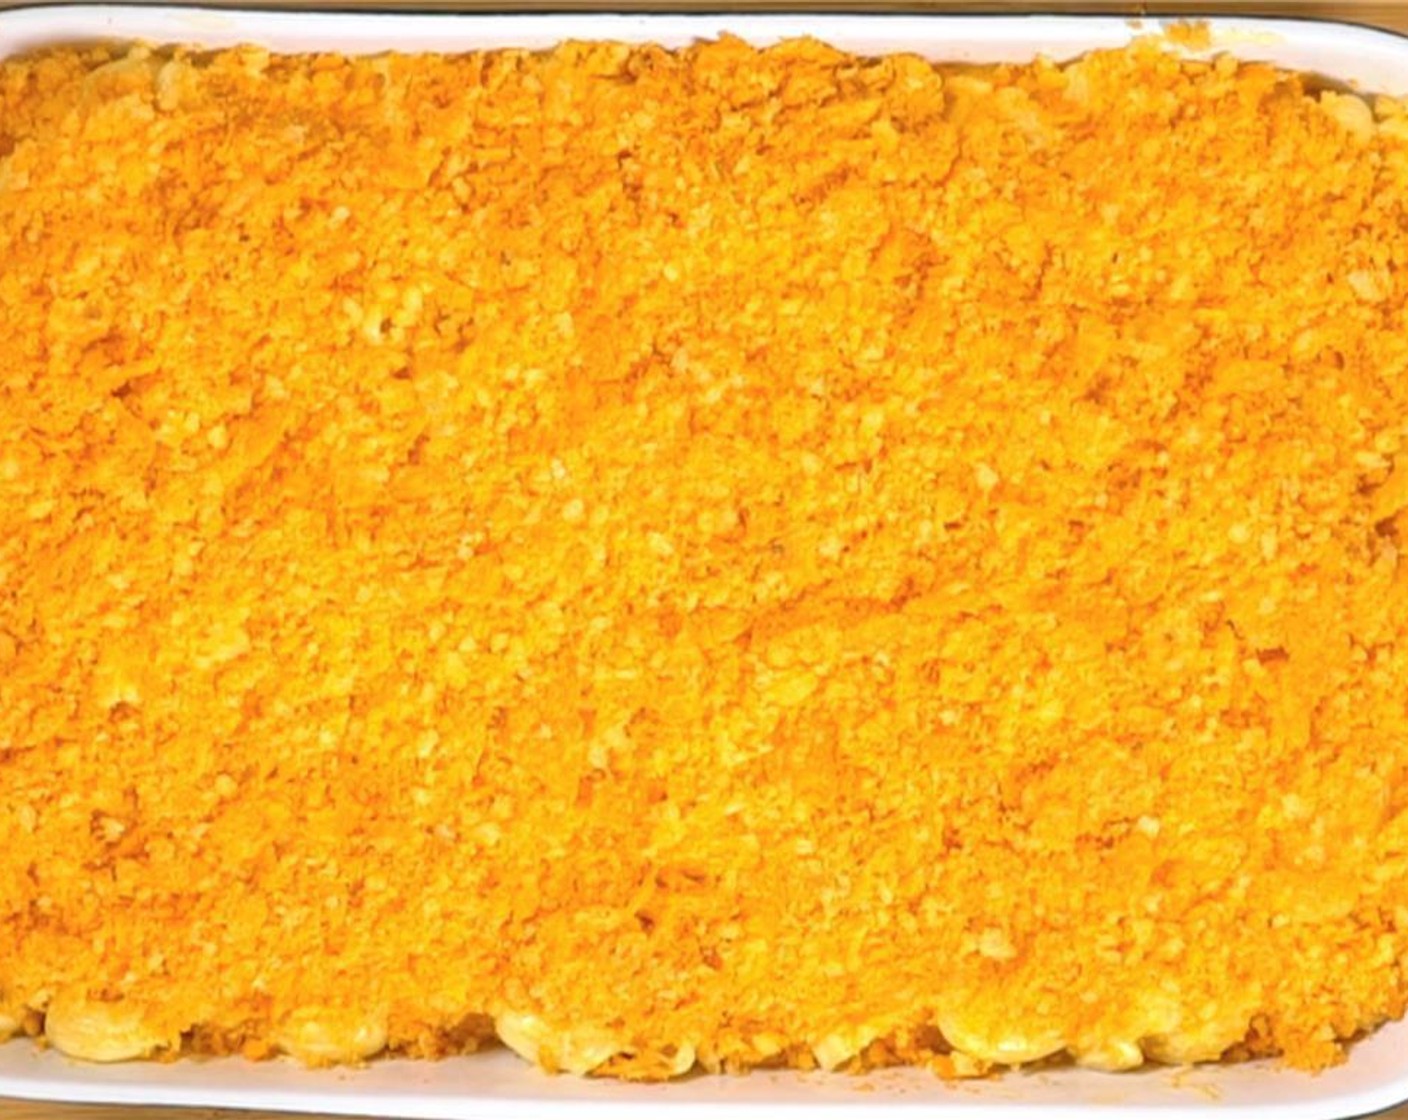 step 6 Add cheesy macaroni to the casserole dish. Crush the bag of Doritos® Nacho Cheese Flavored Tortilla Chips (2 handfuls) and Cheetos Puffs (3 handfuls) by hand or pulse in a food processor a few times, then sprinkle evenly and cover liberally all the way to the edge.